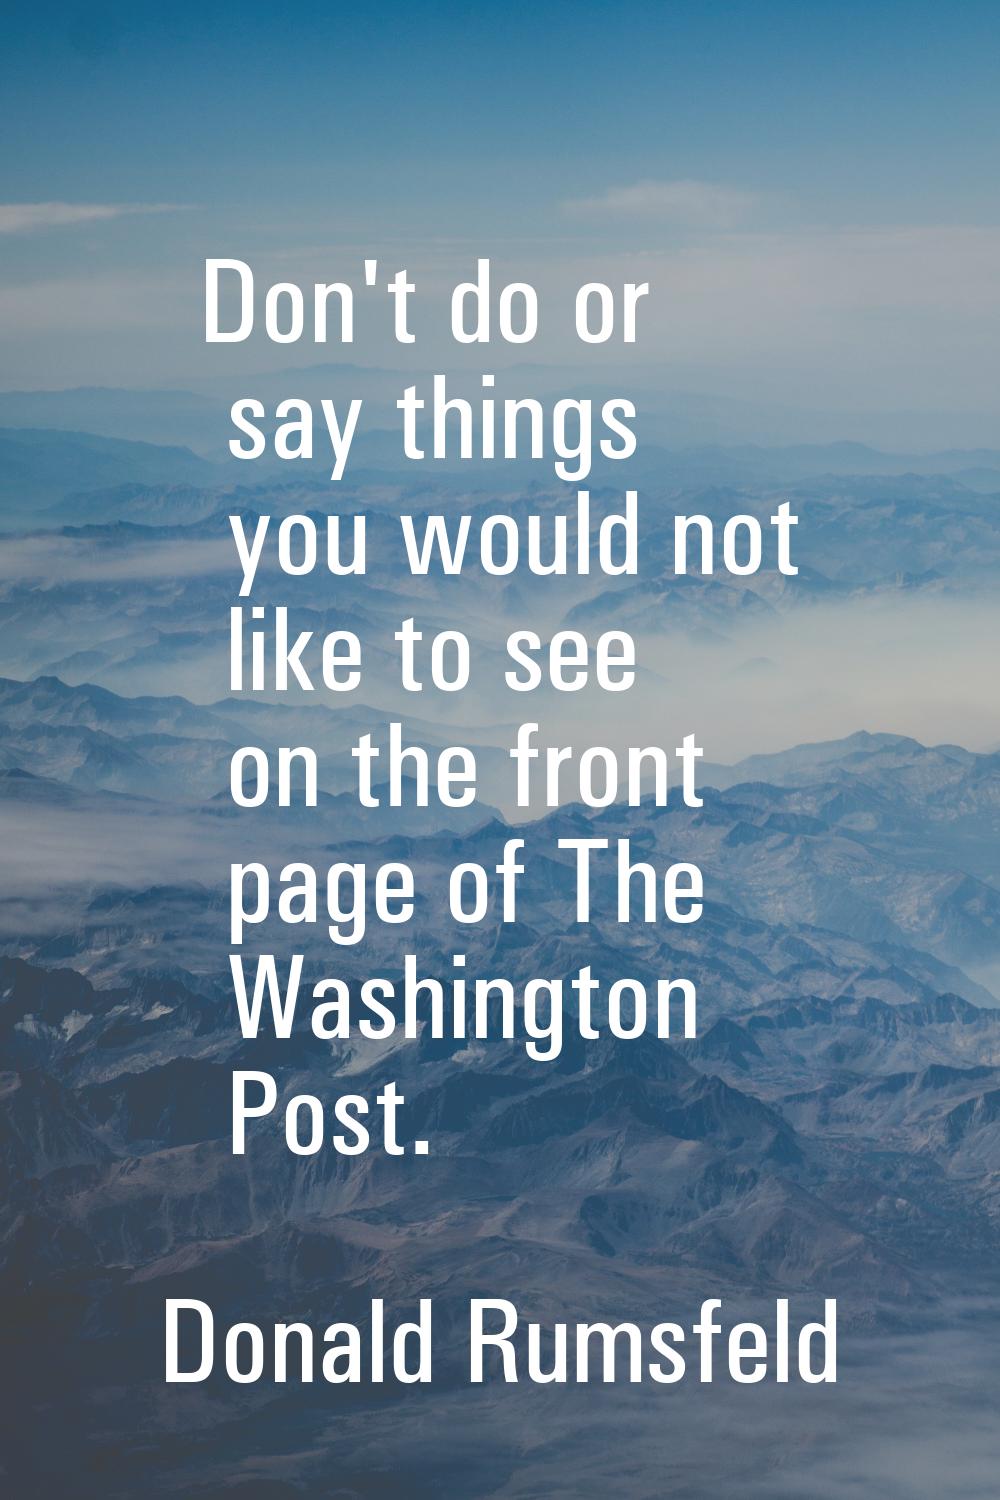 Don't do or say things you would not like to see on the front page of The Washington Post.